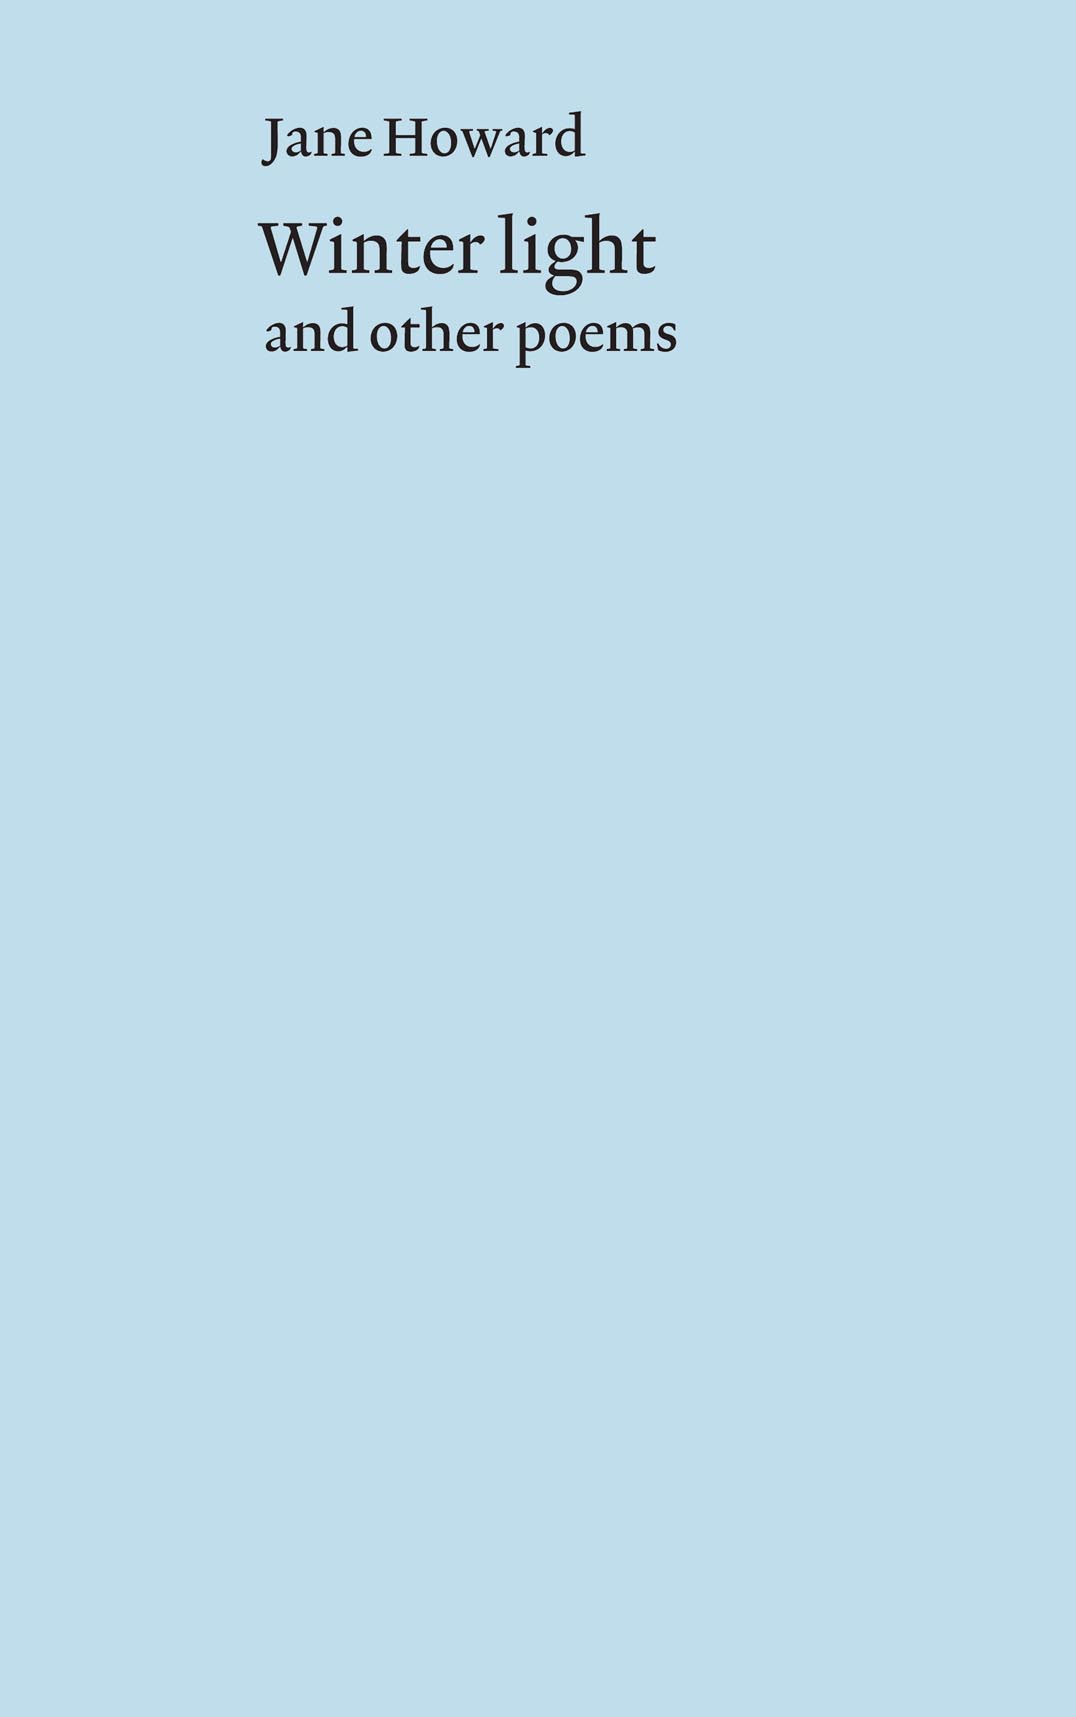 Winter light and other poems